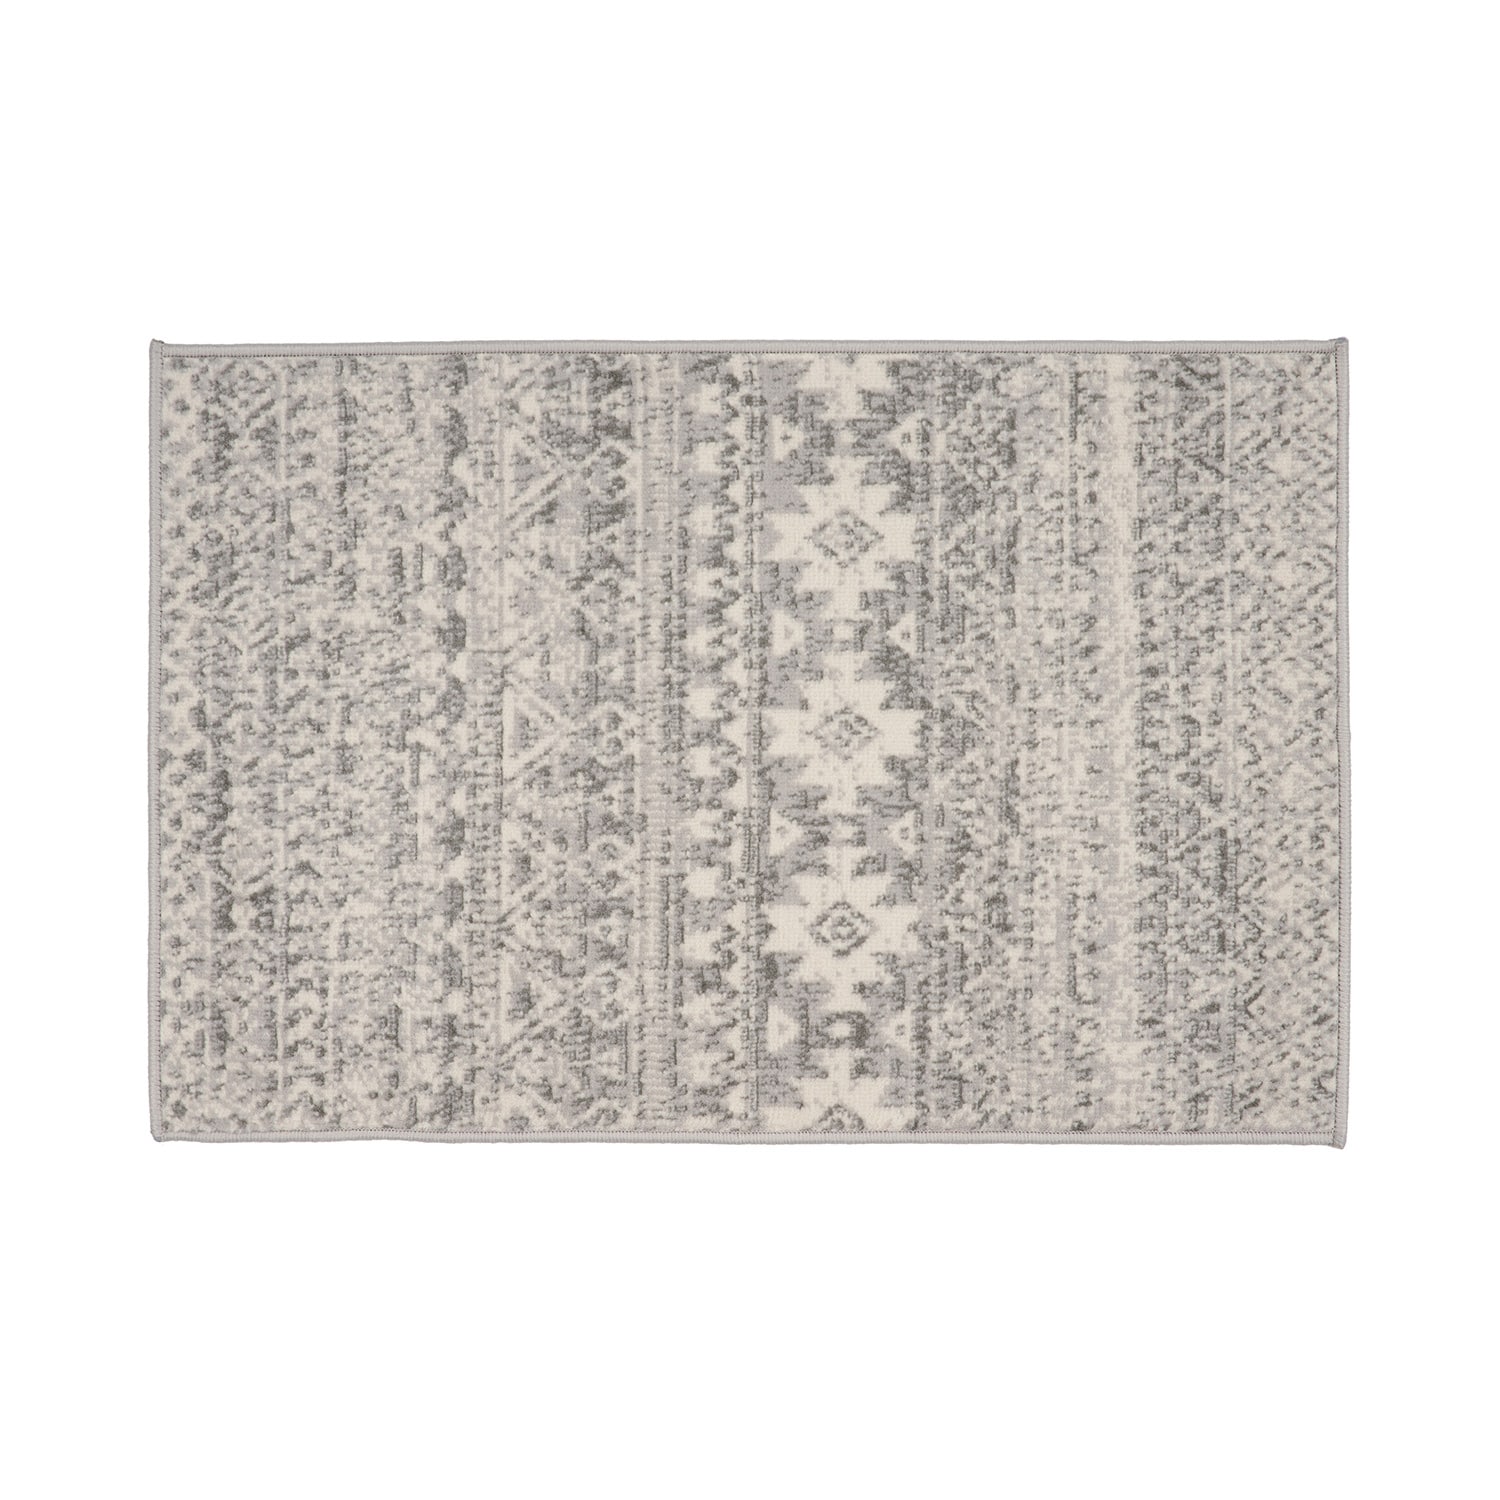 Brooklyn Gray Rugs at Lowes.com